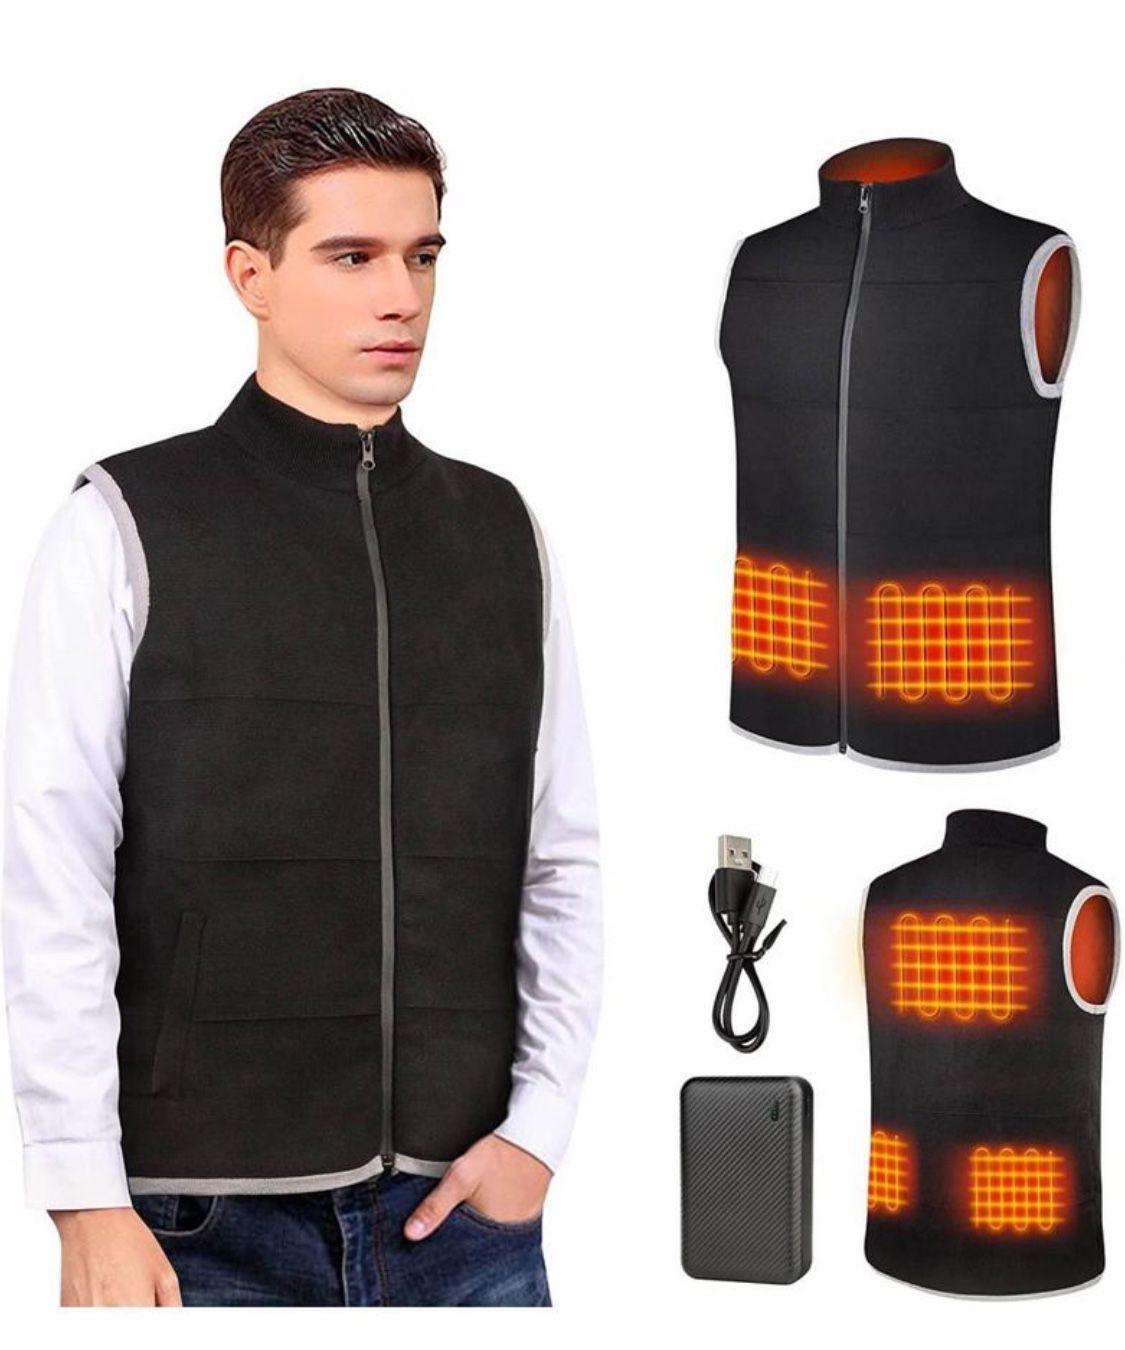 Heated Vest for Men and Women Electric Rechargeable Washable Winter Warmth Outdoor Wear Inside and Outside with Battery Pack